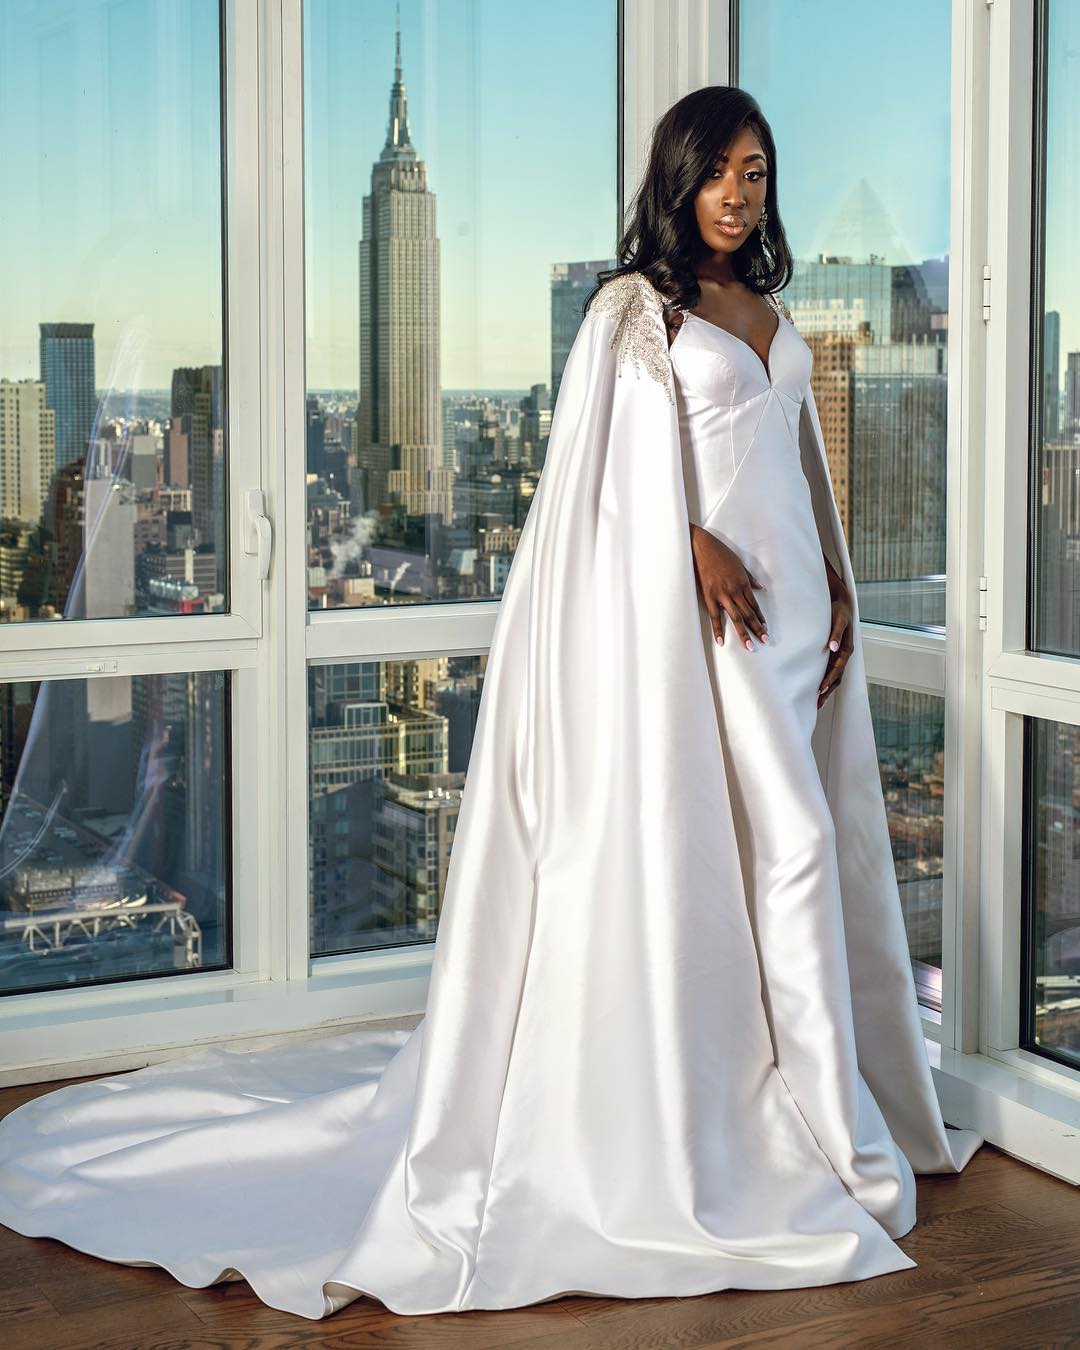 Stunning Wedding Dresses By Black Owned Brands   Essence